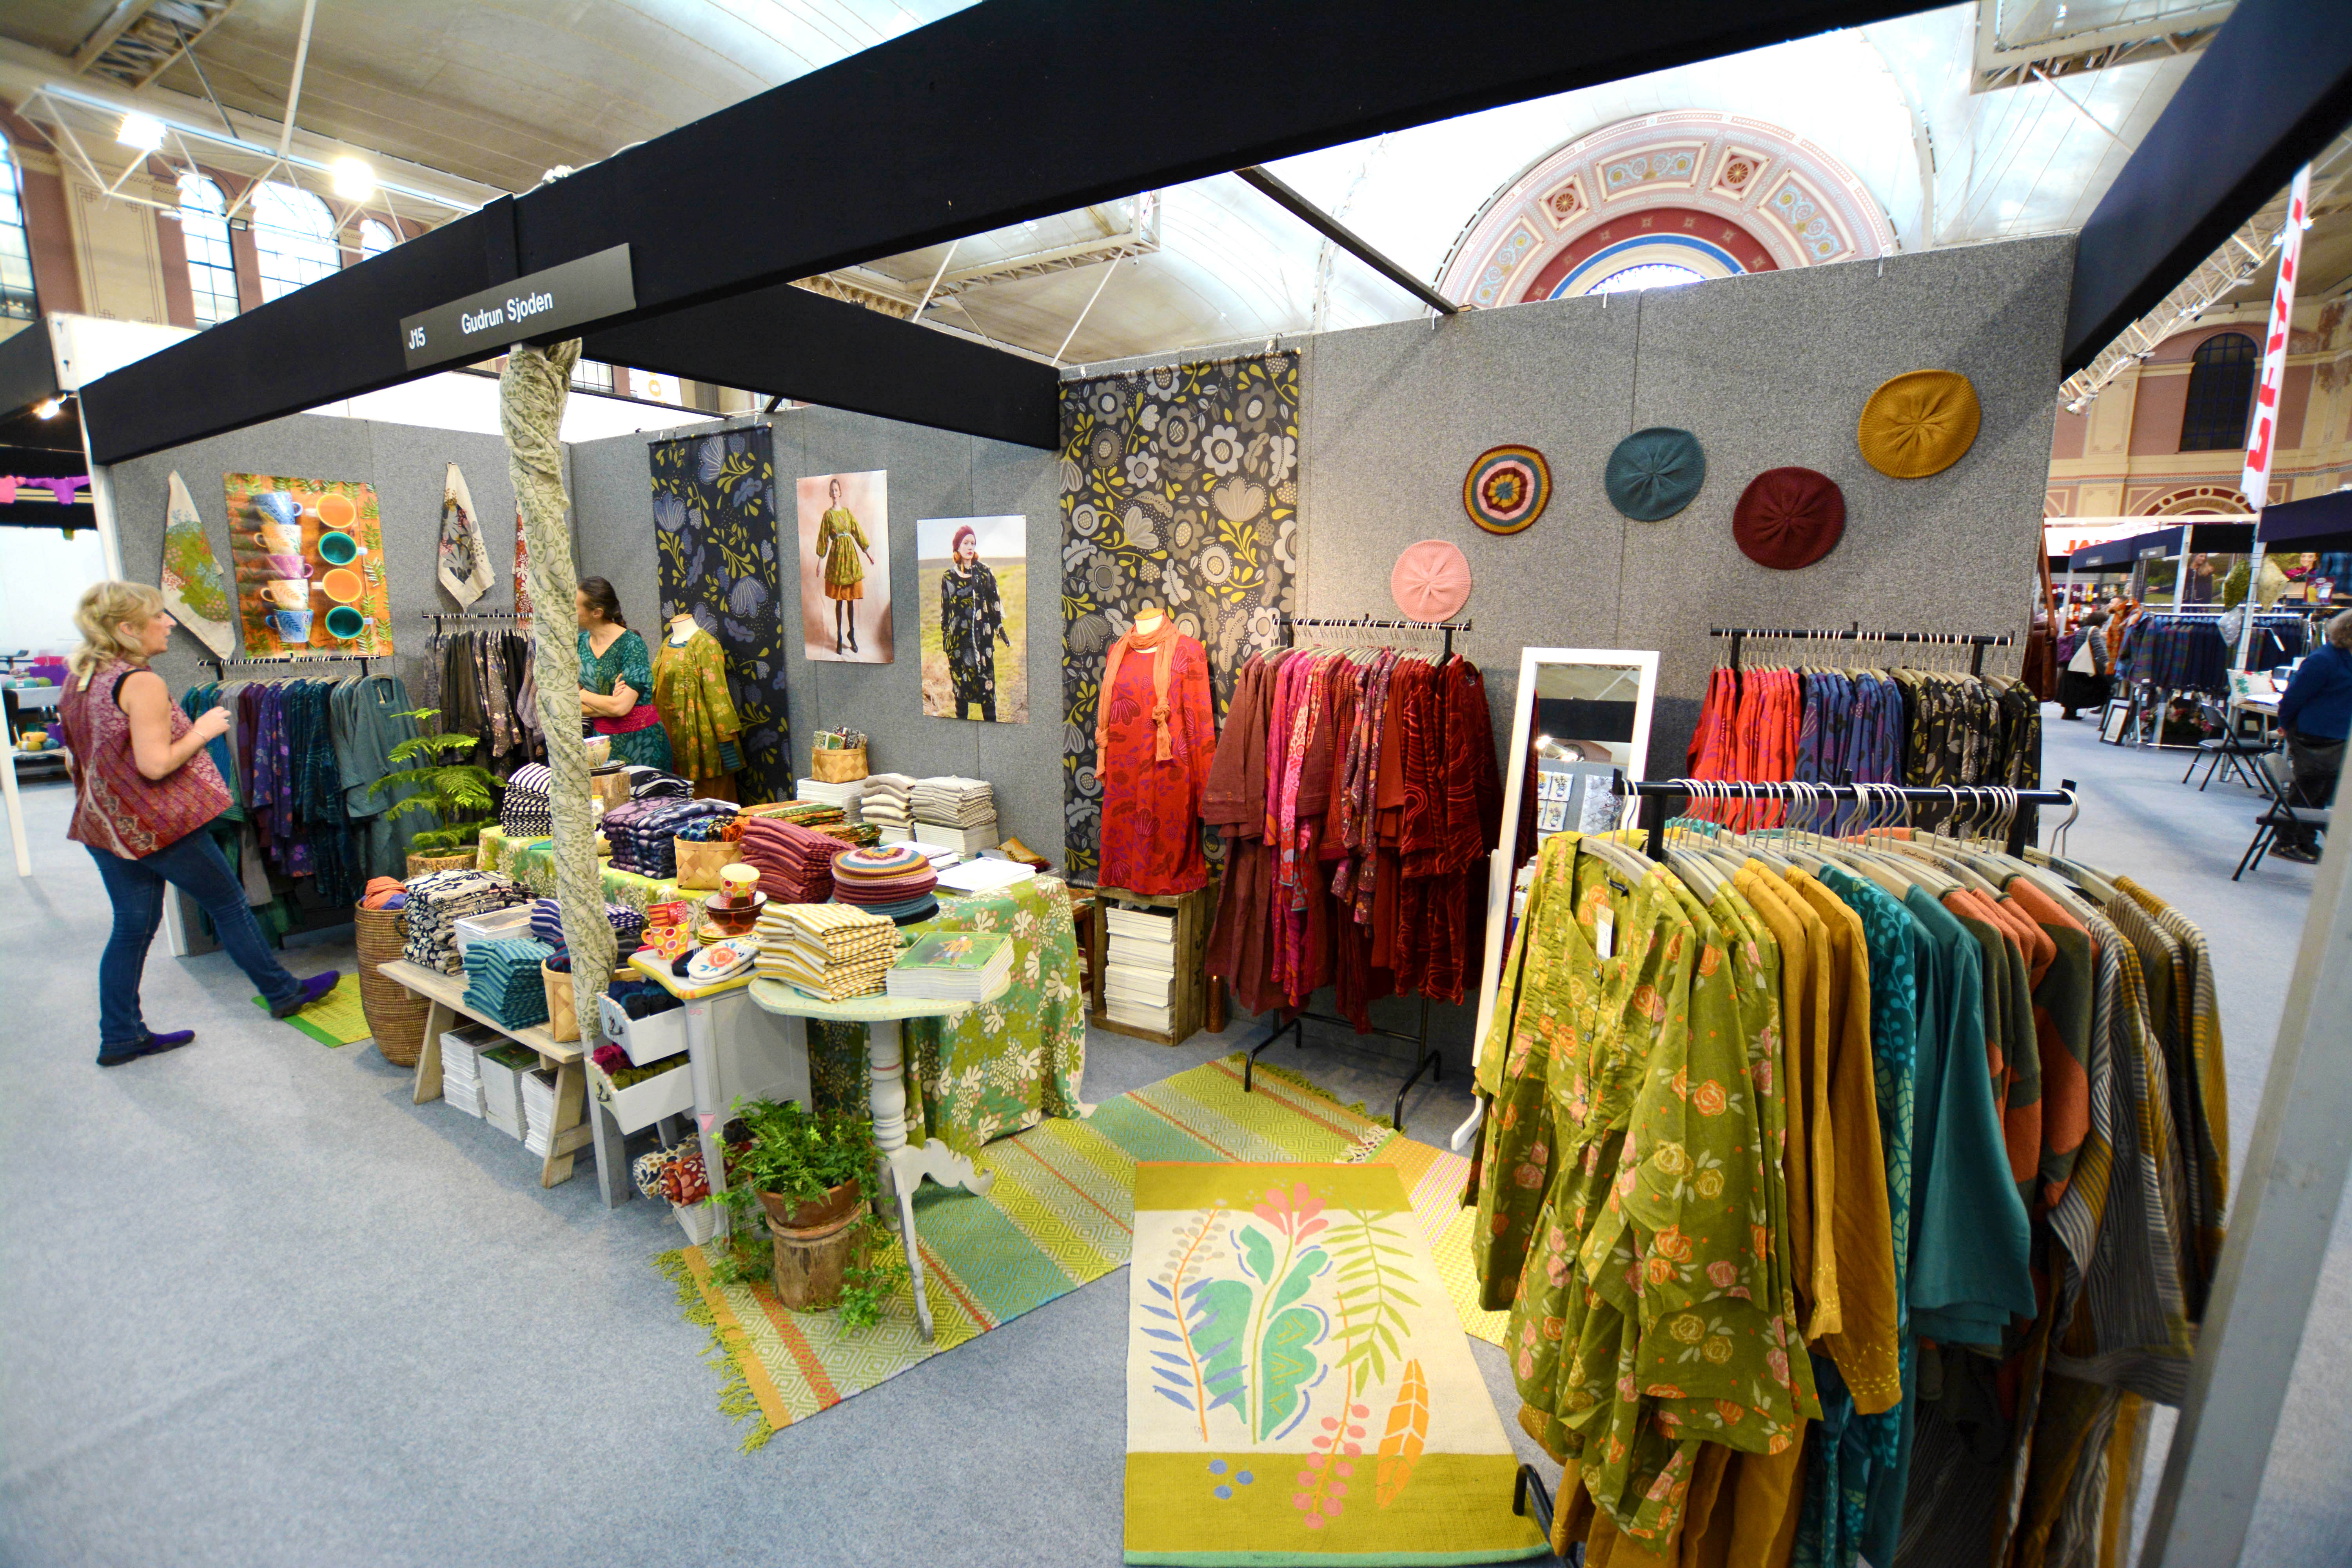 Exhibitor Stand at the Knitting and Stitching Show 2018